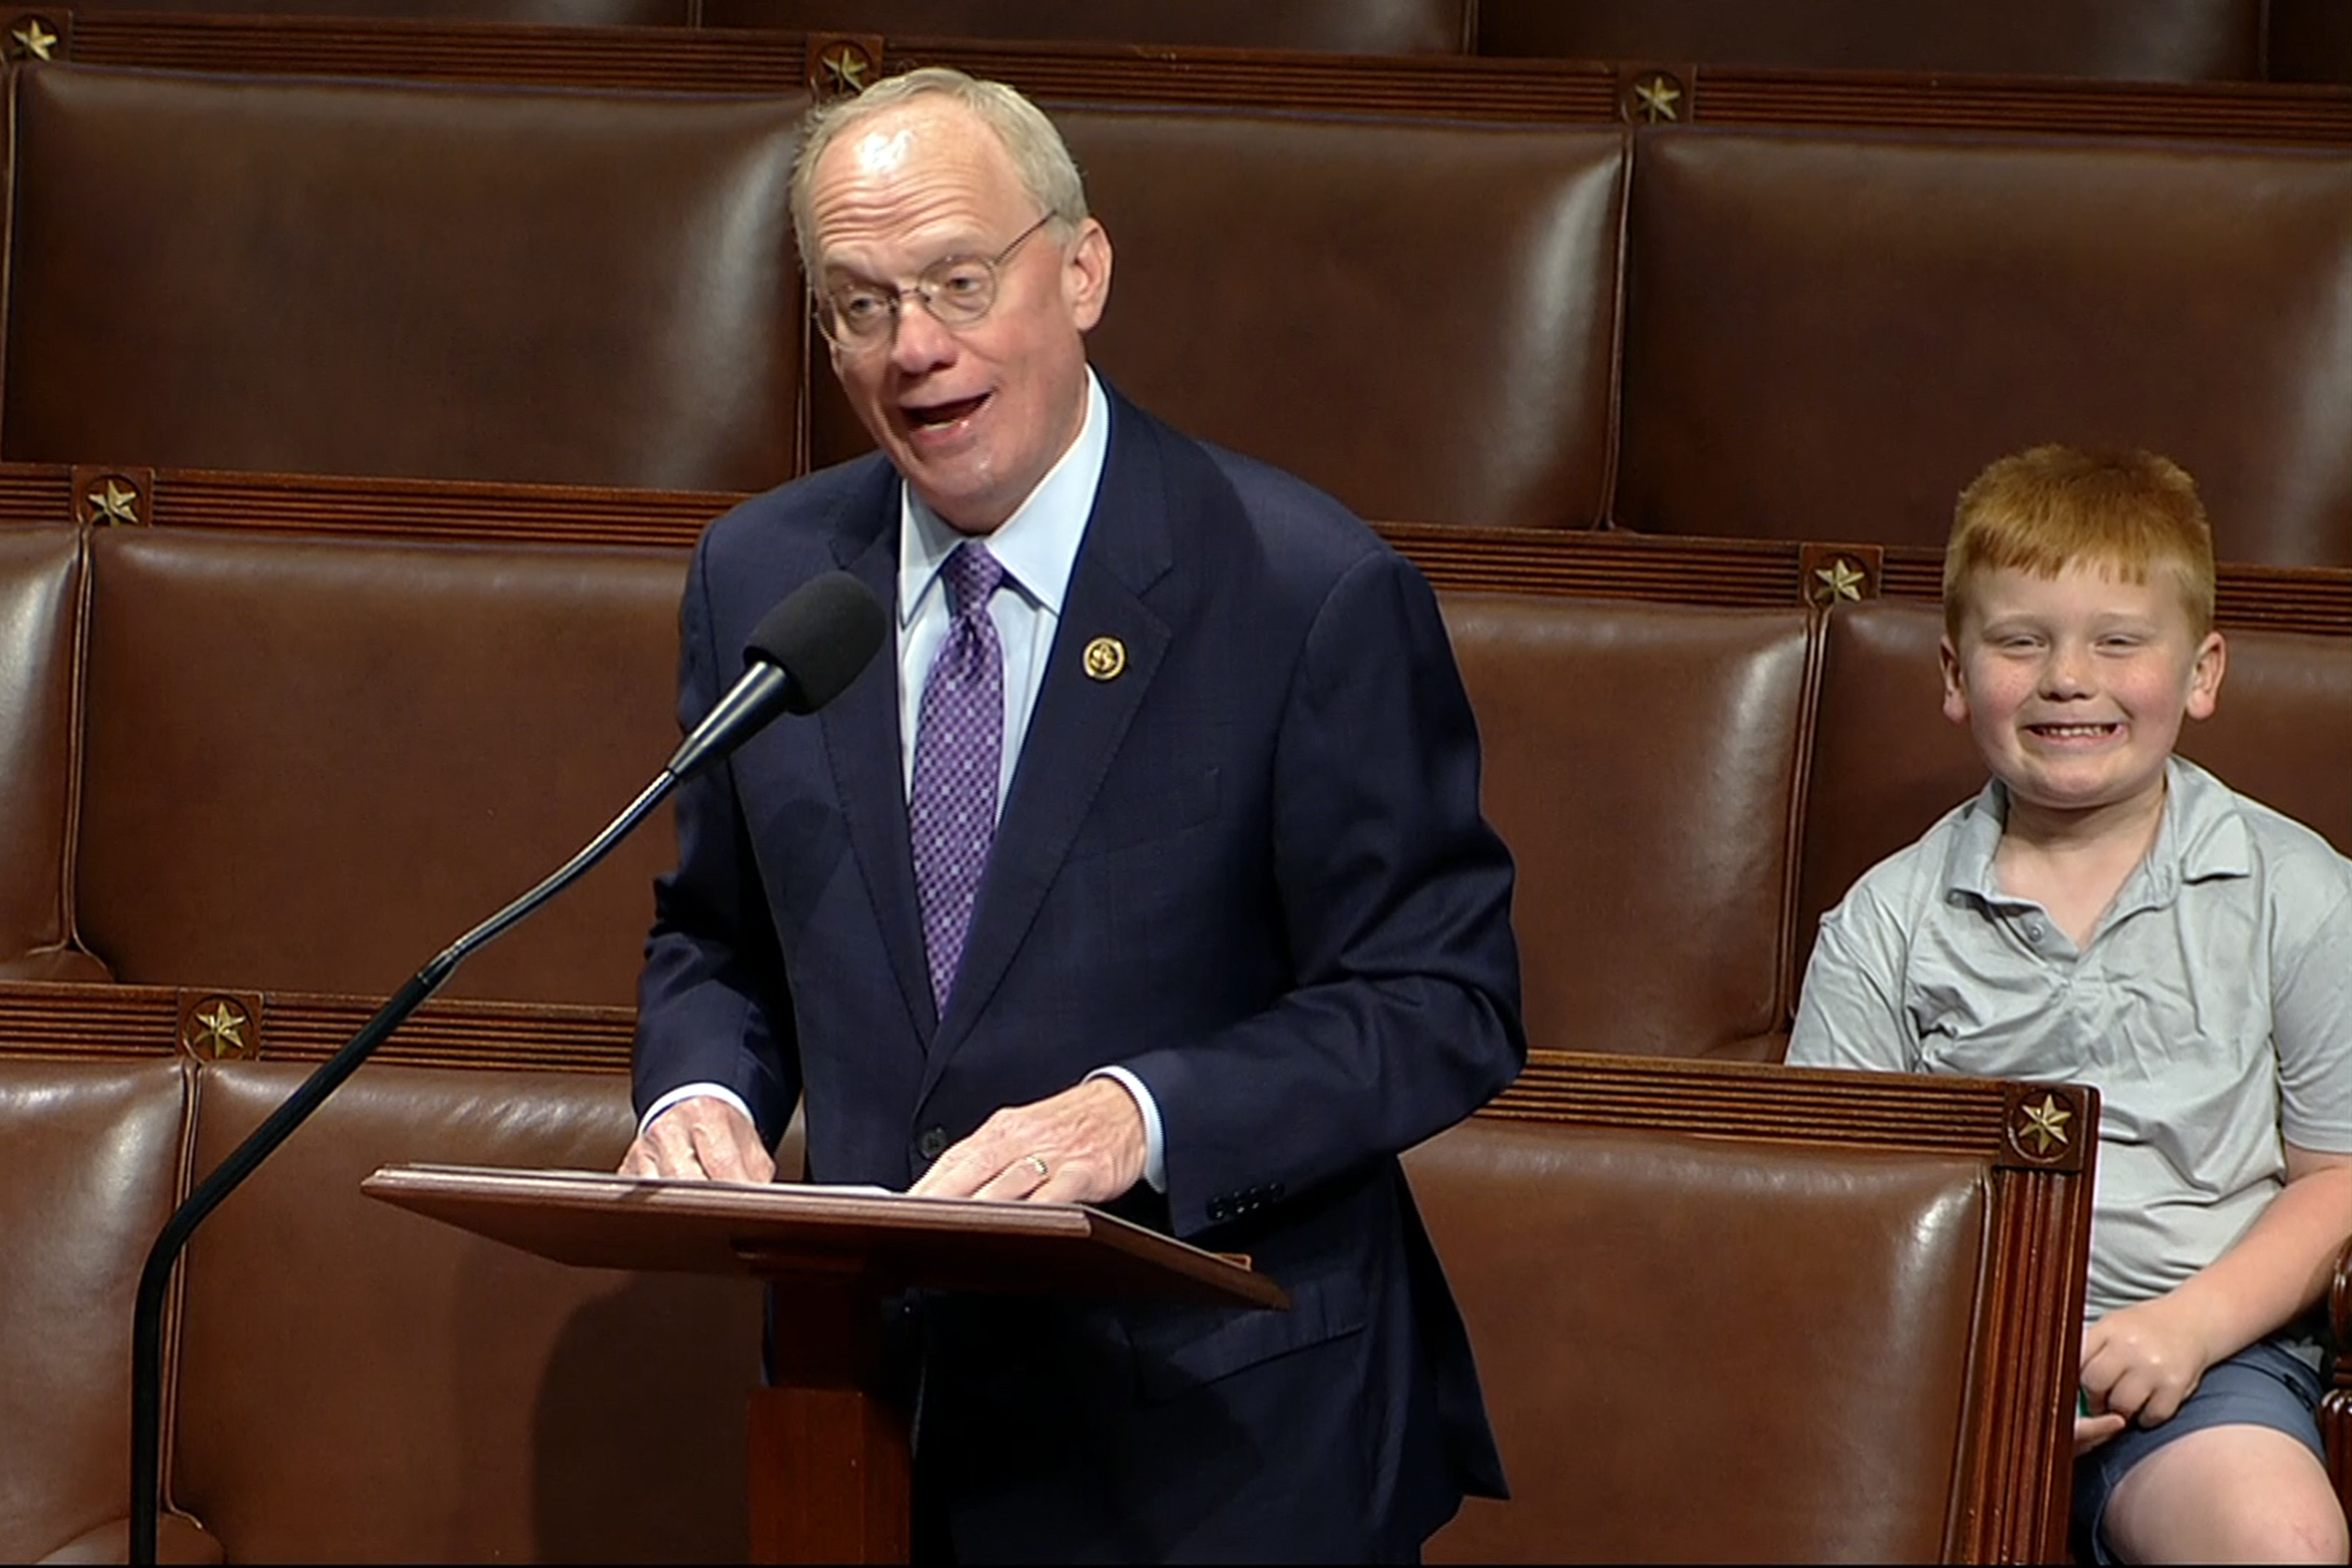 Rep. John Rose speaks on the floor of the House of Representatives in Washington, D.C., on Monday, as his son Guy smiles behind.